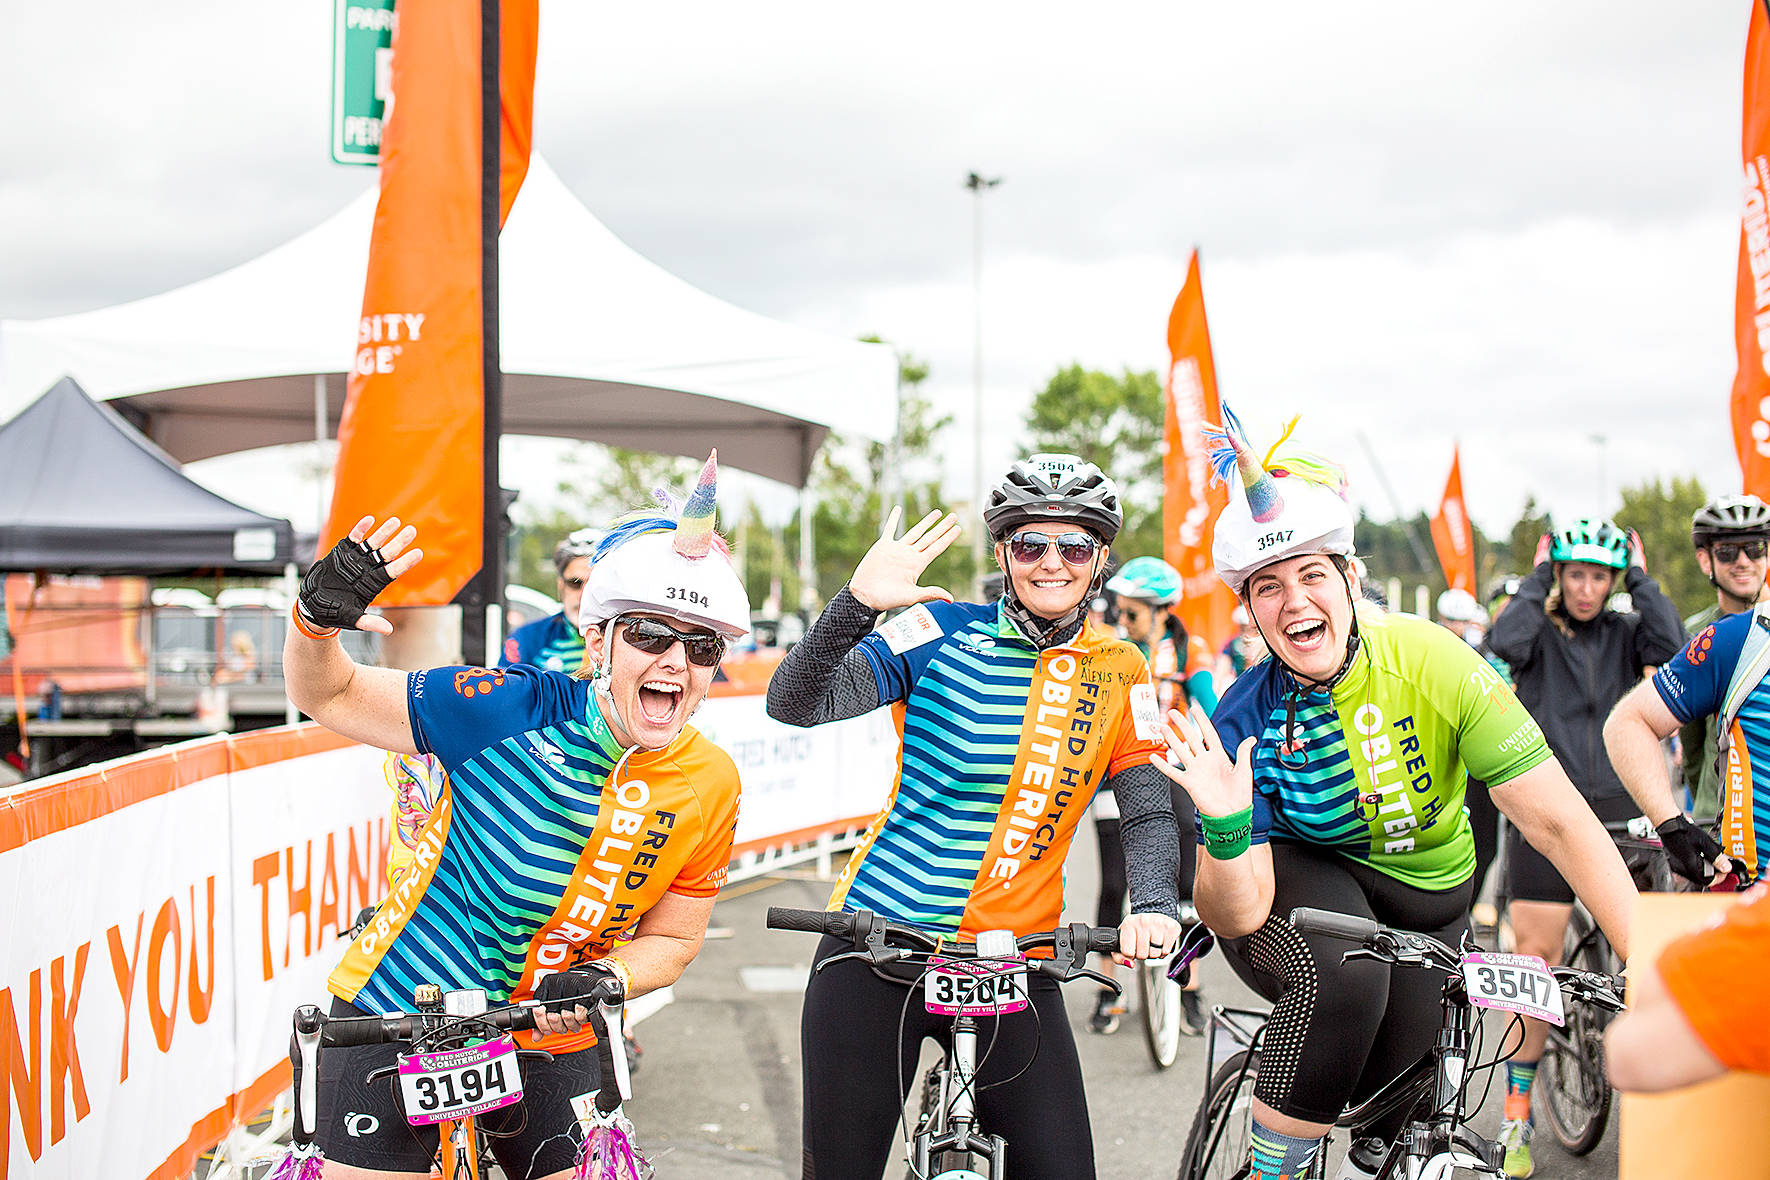 Three friends and cyclists celebrate as they cross the finish line during the 2018 Obliteride event. Photo courtesy of Fred Hutch Obliteride.                                 Three friends and cyclists celebrate as they cross the finish line during the 2018 Obliteride event. Photo courtesy of Fred Hutch Obliteride.